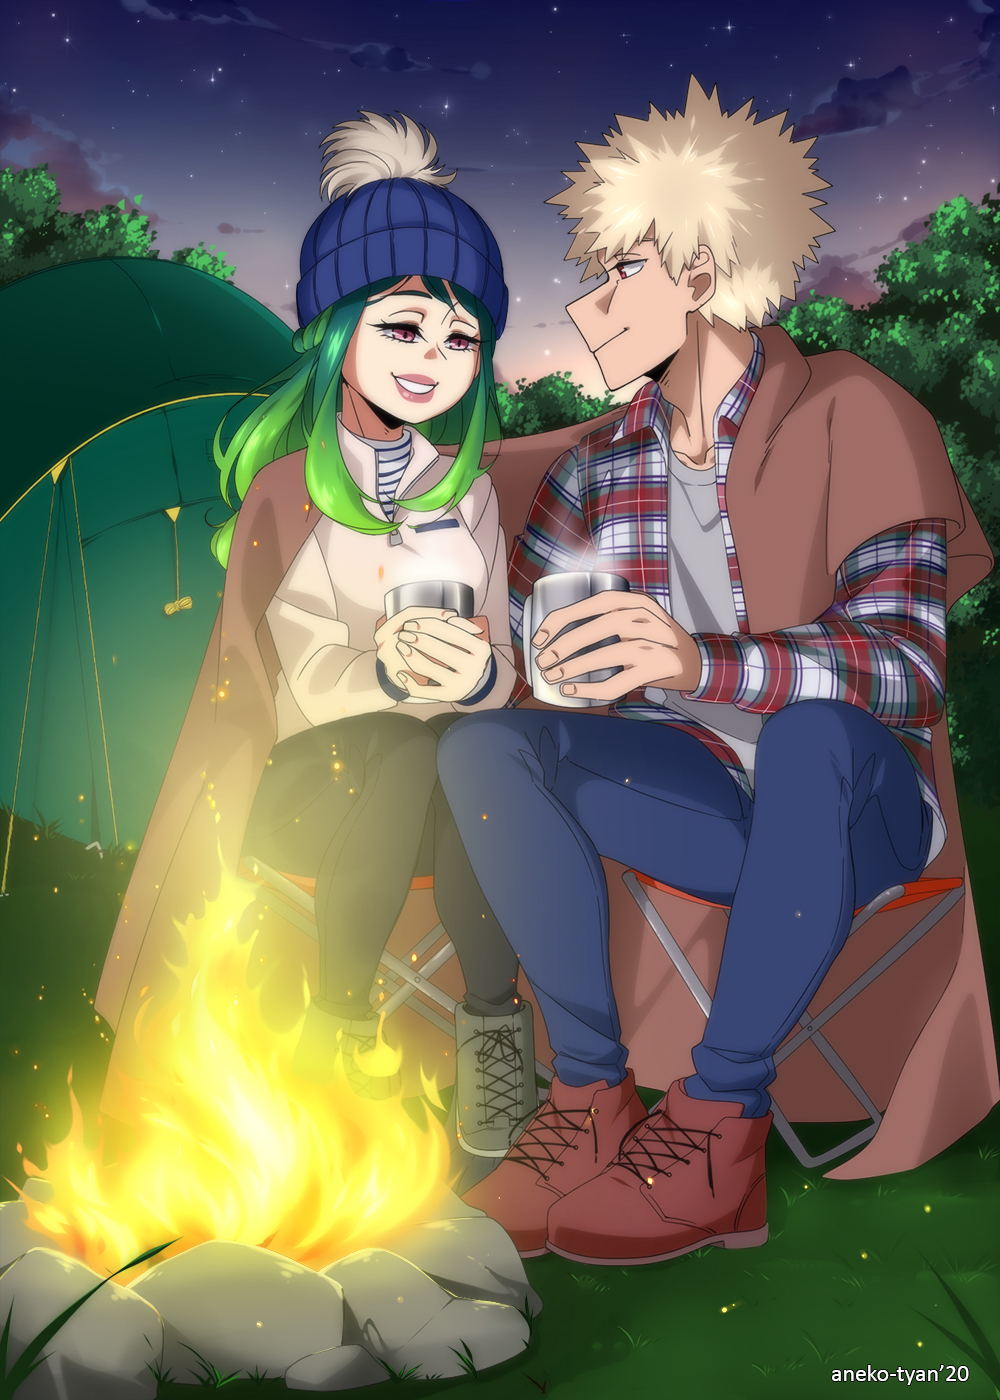 [BNHA YCH] Sitting by the campfire [6] by Aneko-tyan on DeviantArt